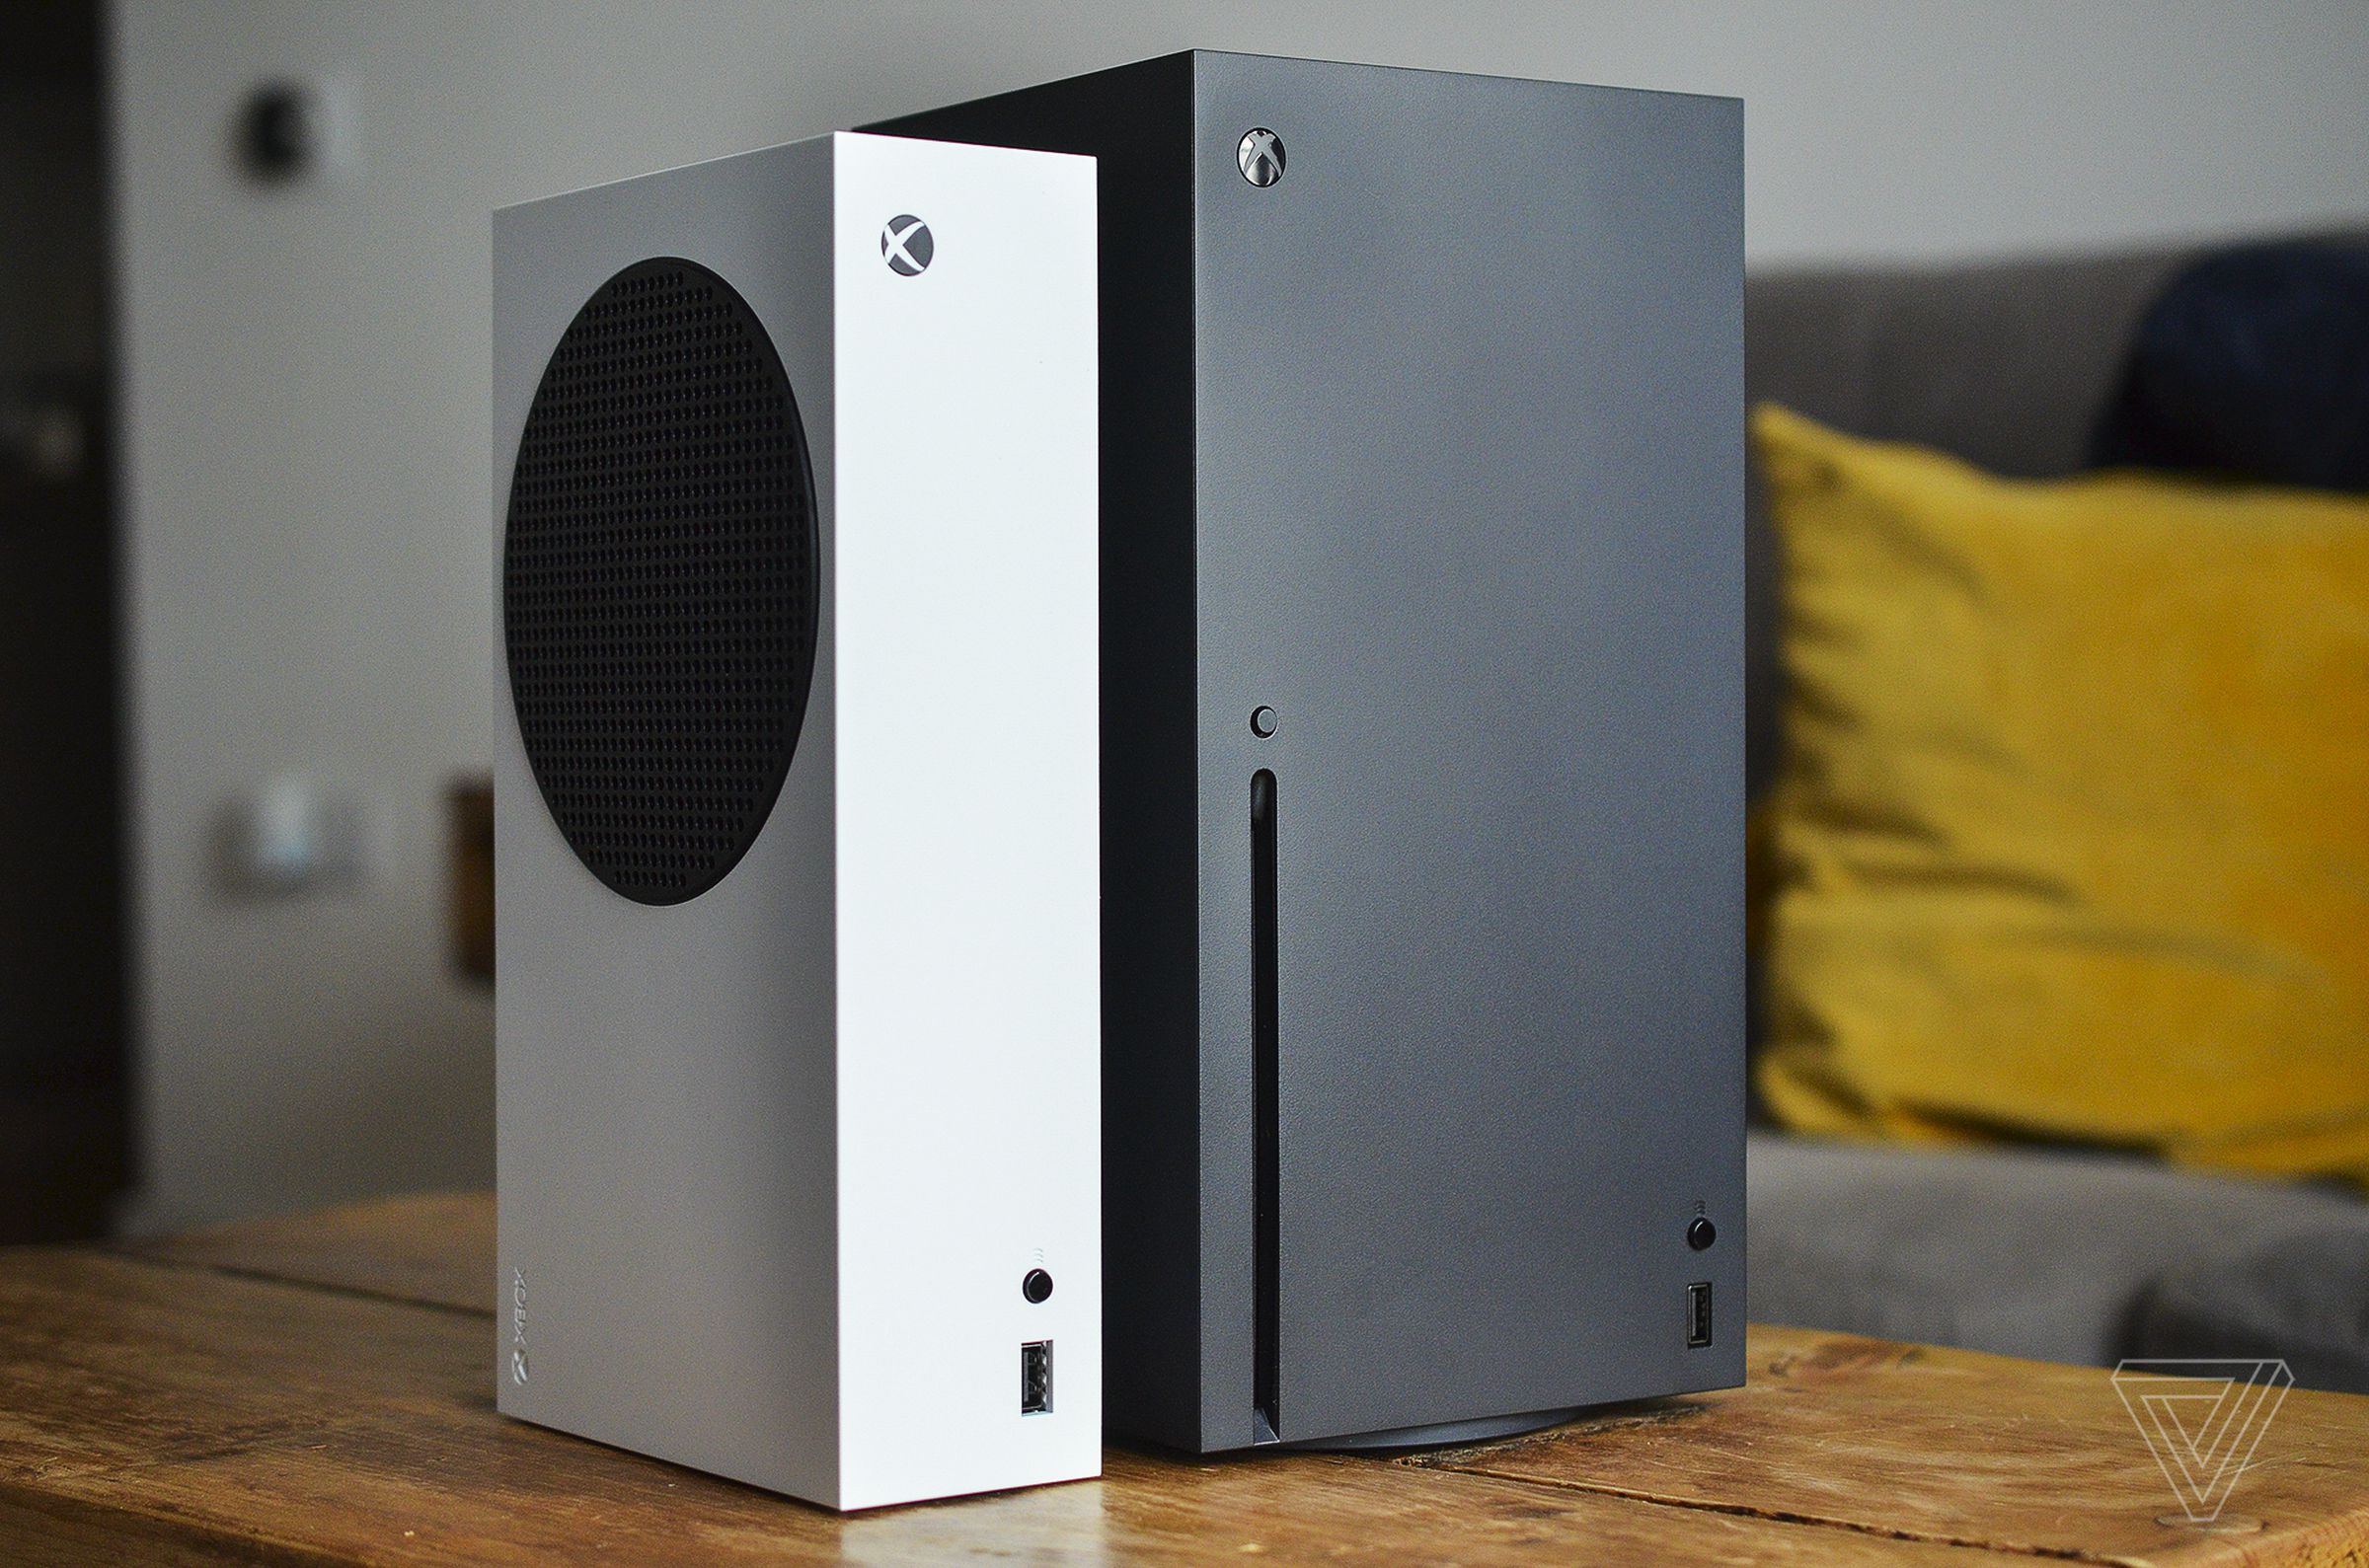 Microsoft's white Xbox Series S sits on a wooden coffee table in the living room, alongside a larger and black Xbox Series X.